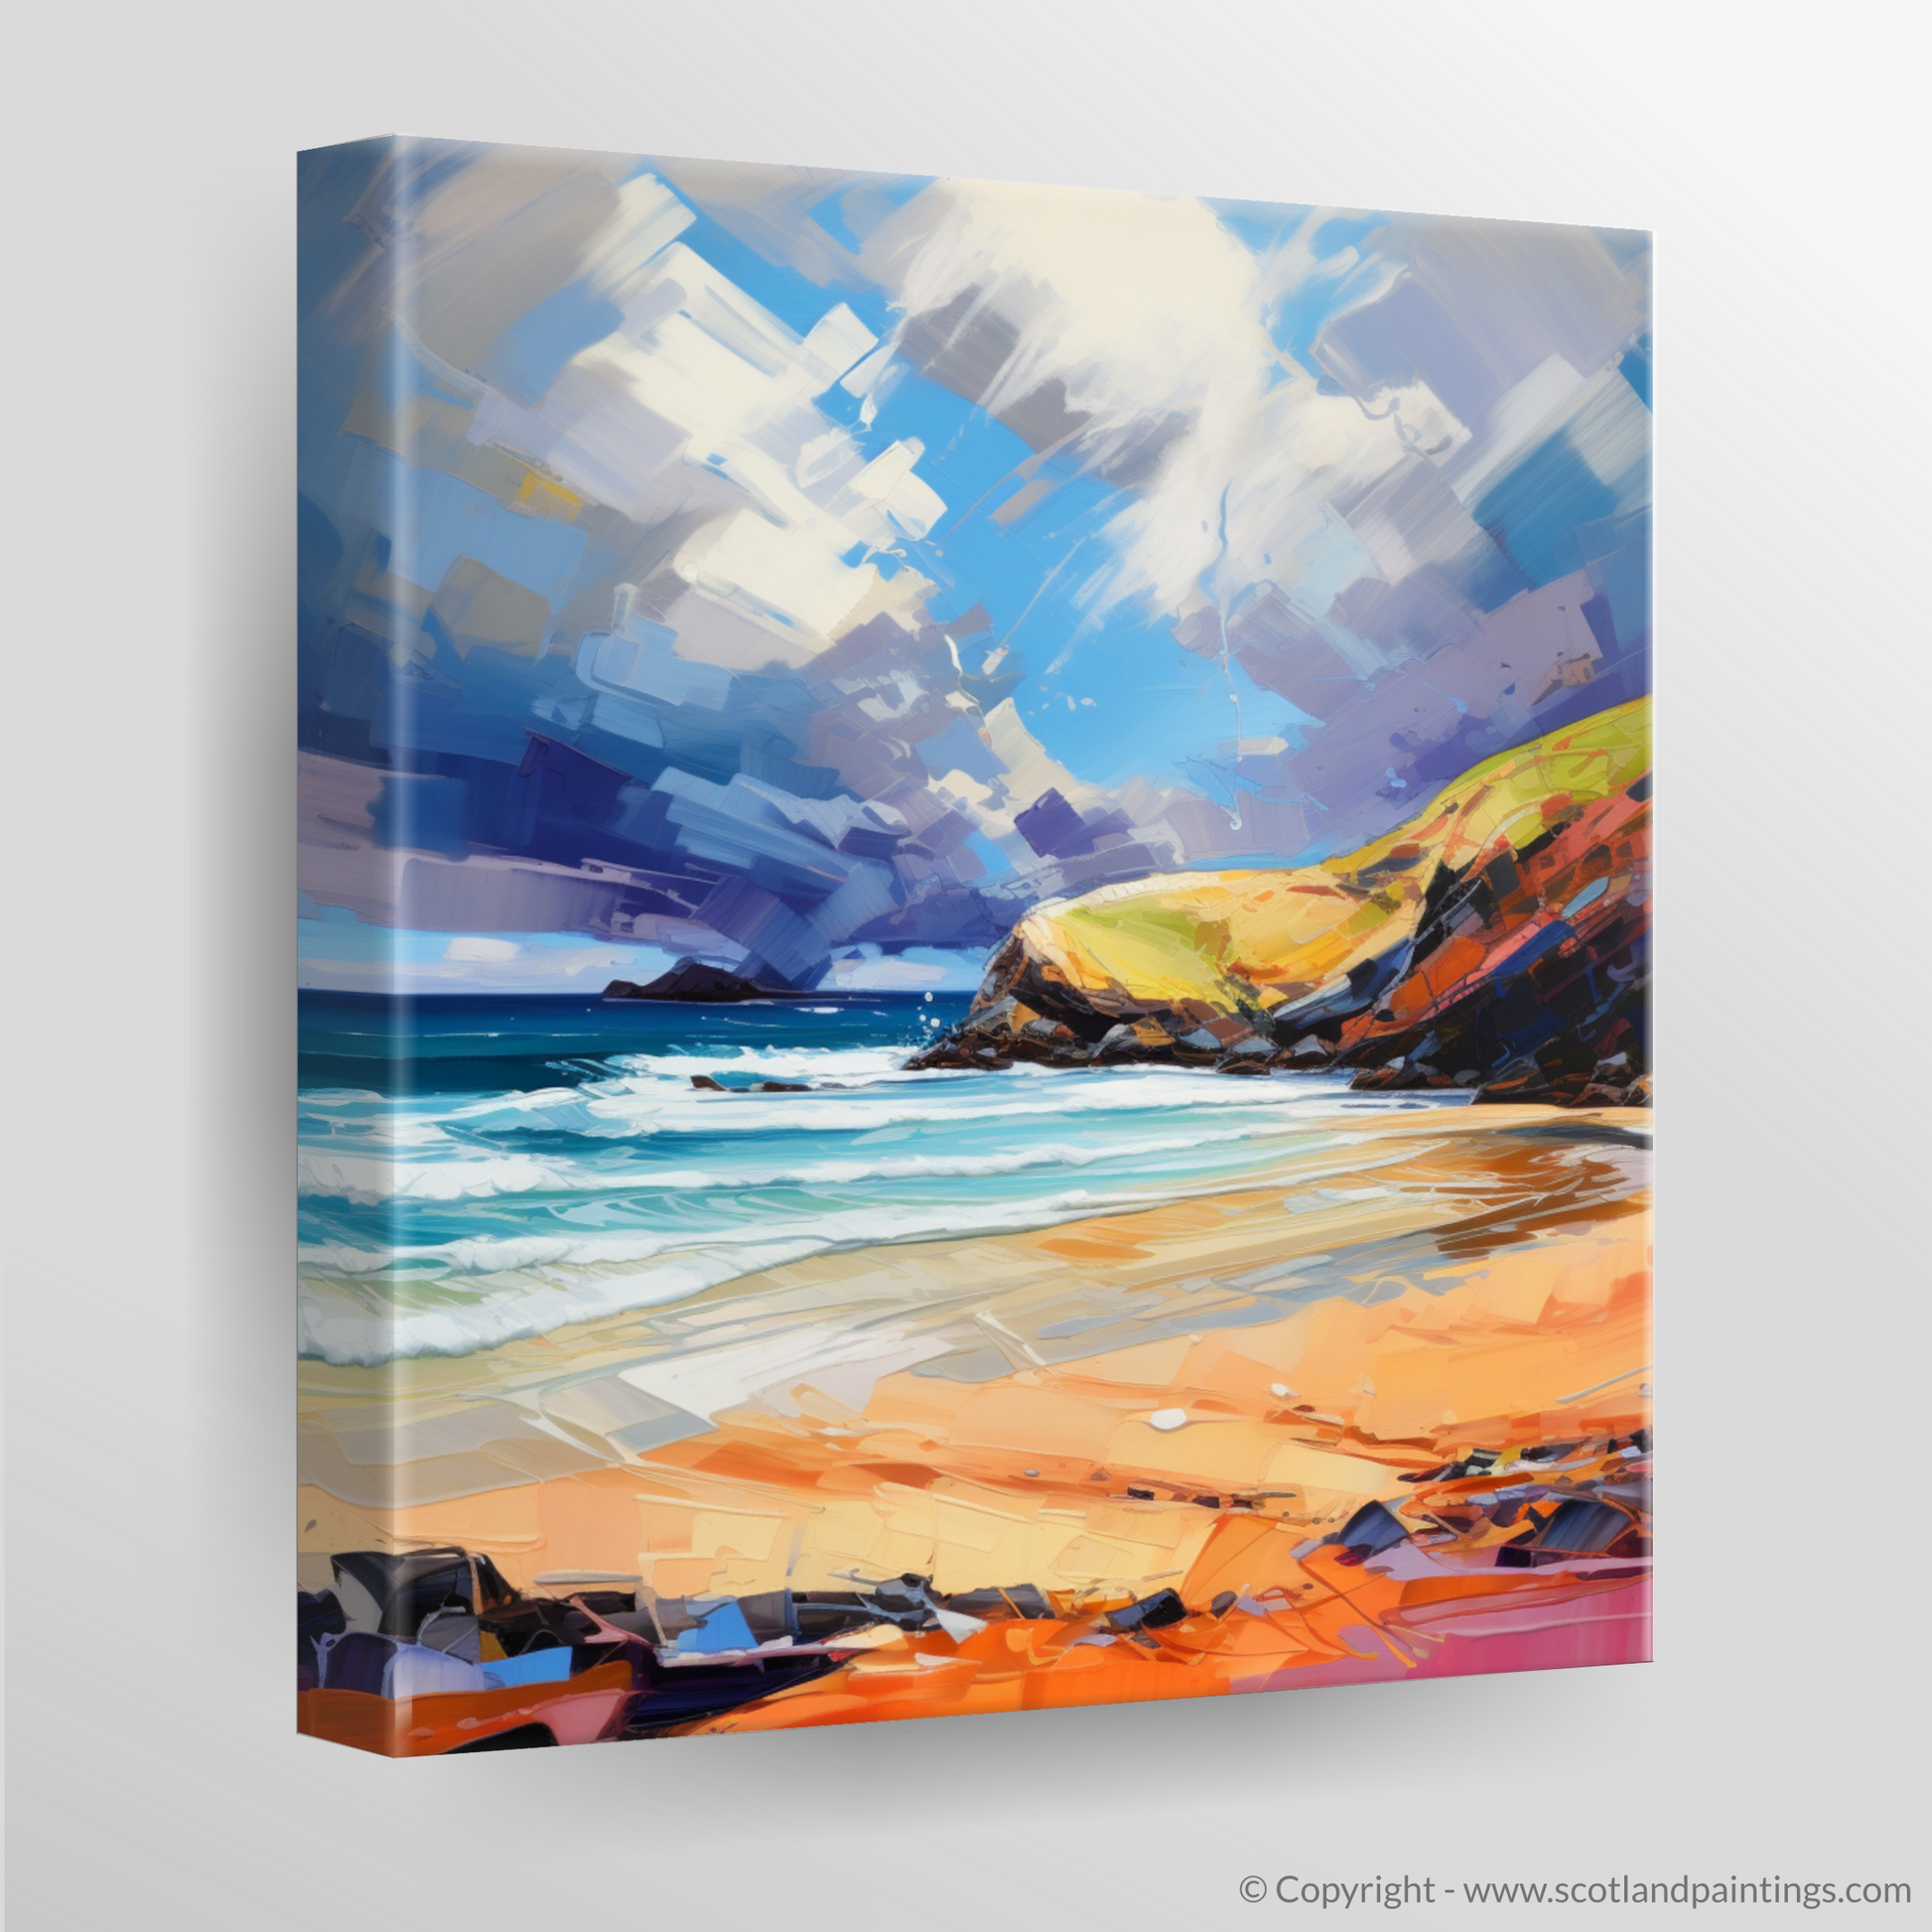 Canvas Print of Sandwood Bay with a stormy sky